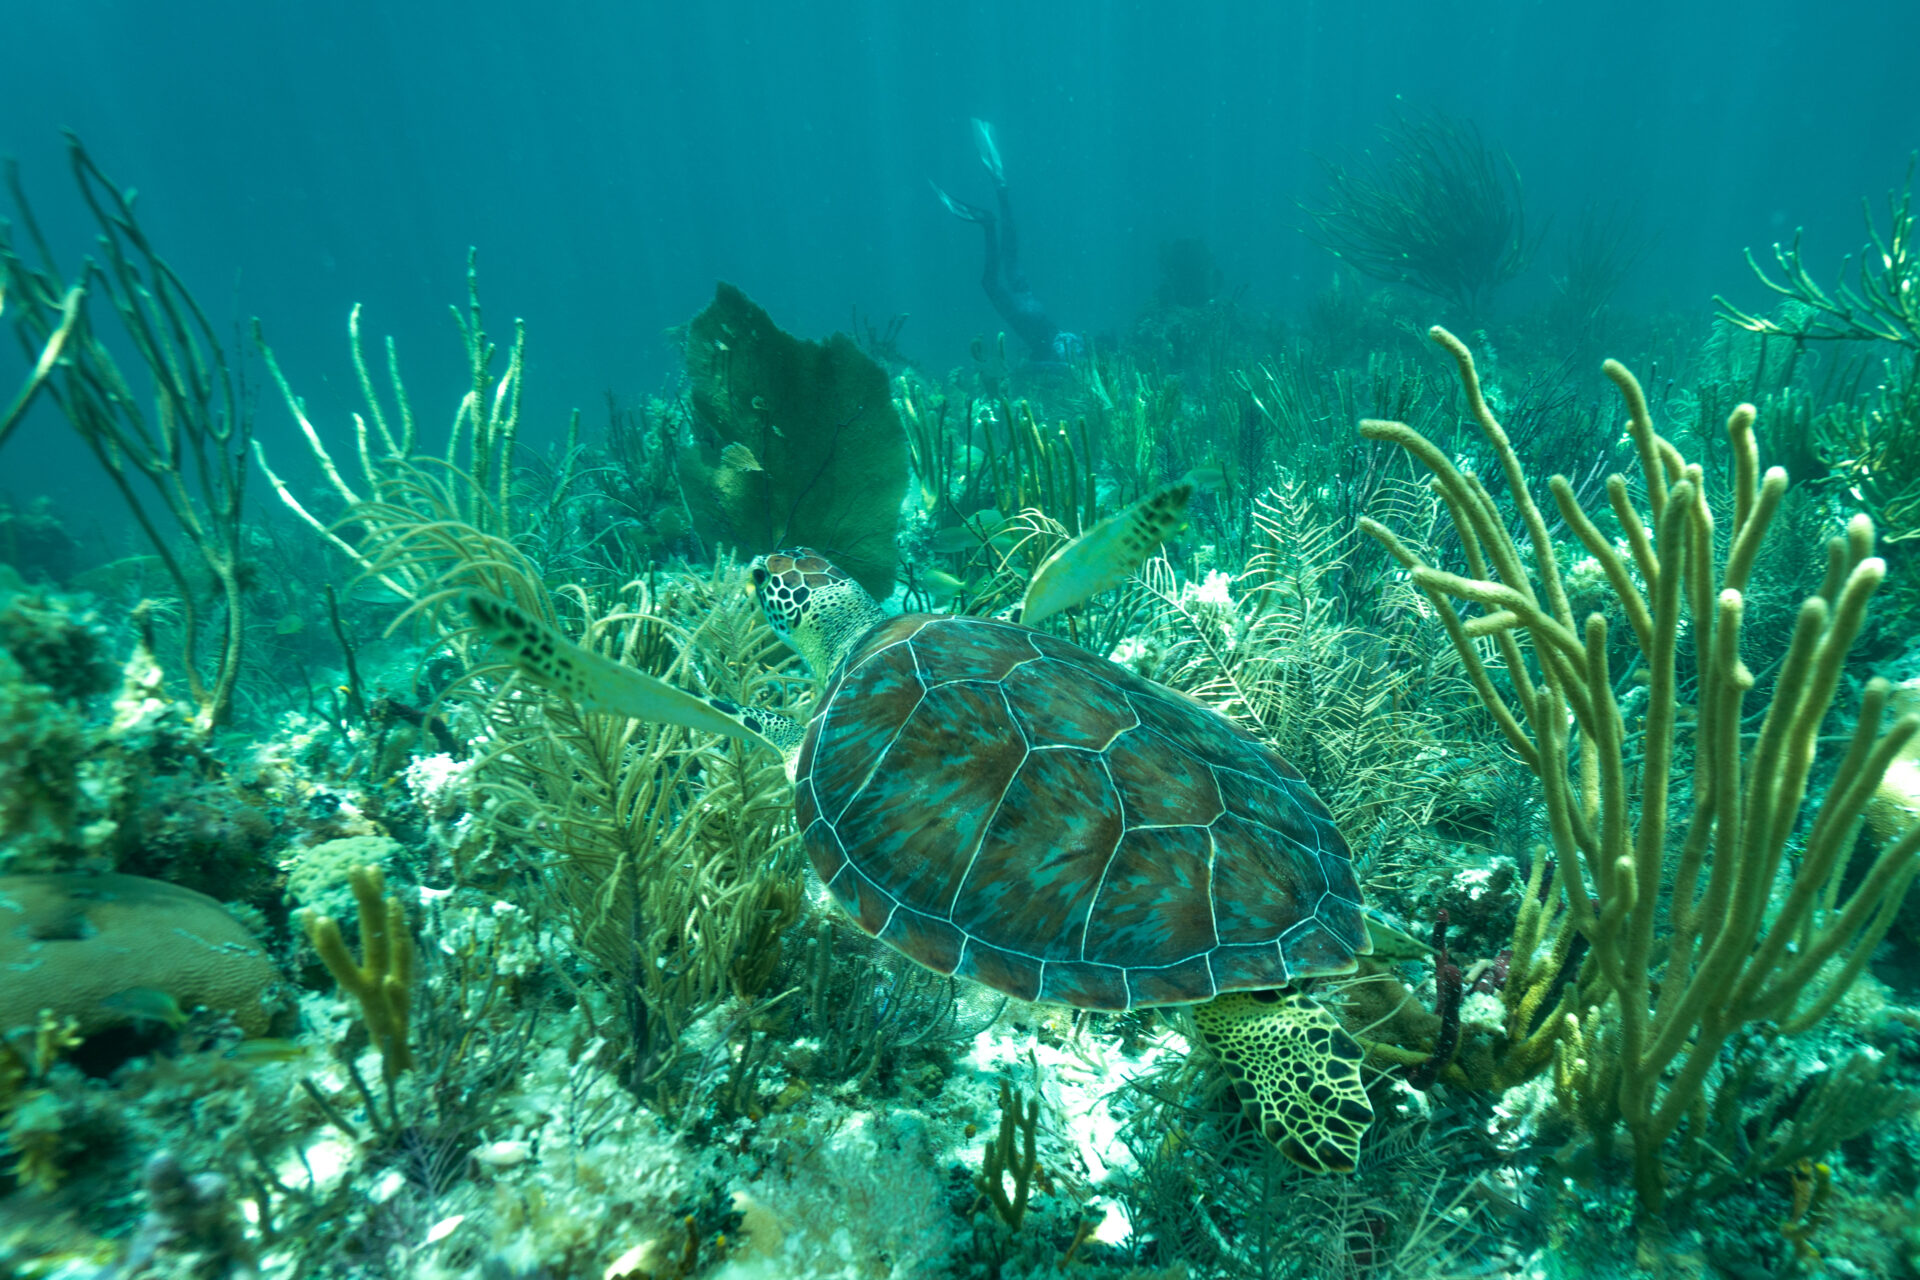 Image of turtle underwater before editing. Underwater Photography requires the most editing of all!